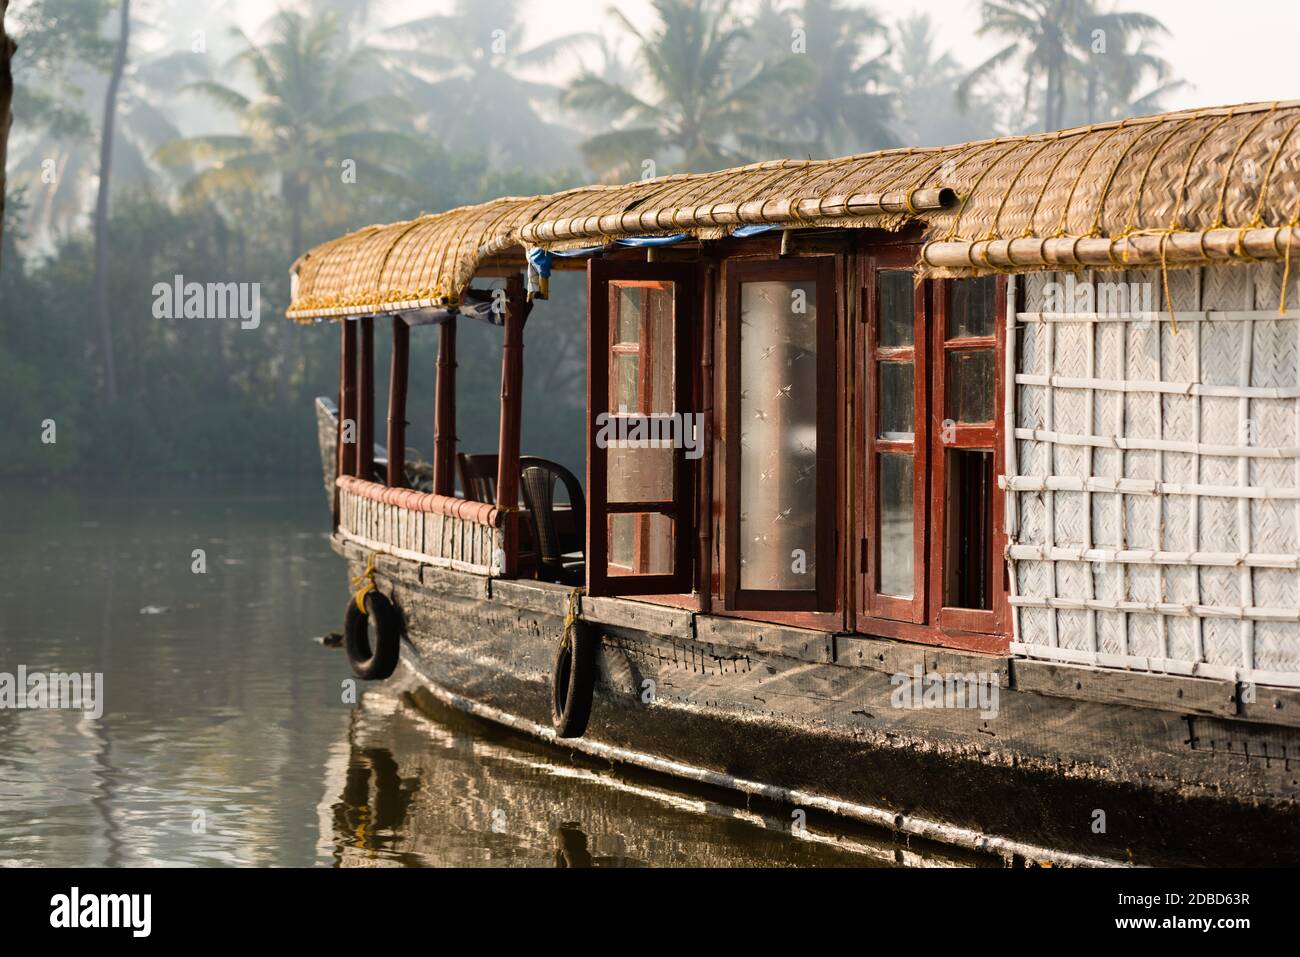 KOCHI, INDIA - 5 FEB 2017: A traditional house boat is anchored on the shores of a fishing lake in Kerala's Backwaters, India. The backwaters are a po Stock Photo